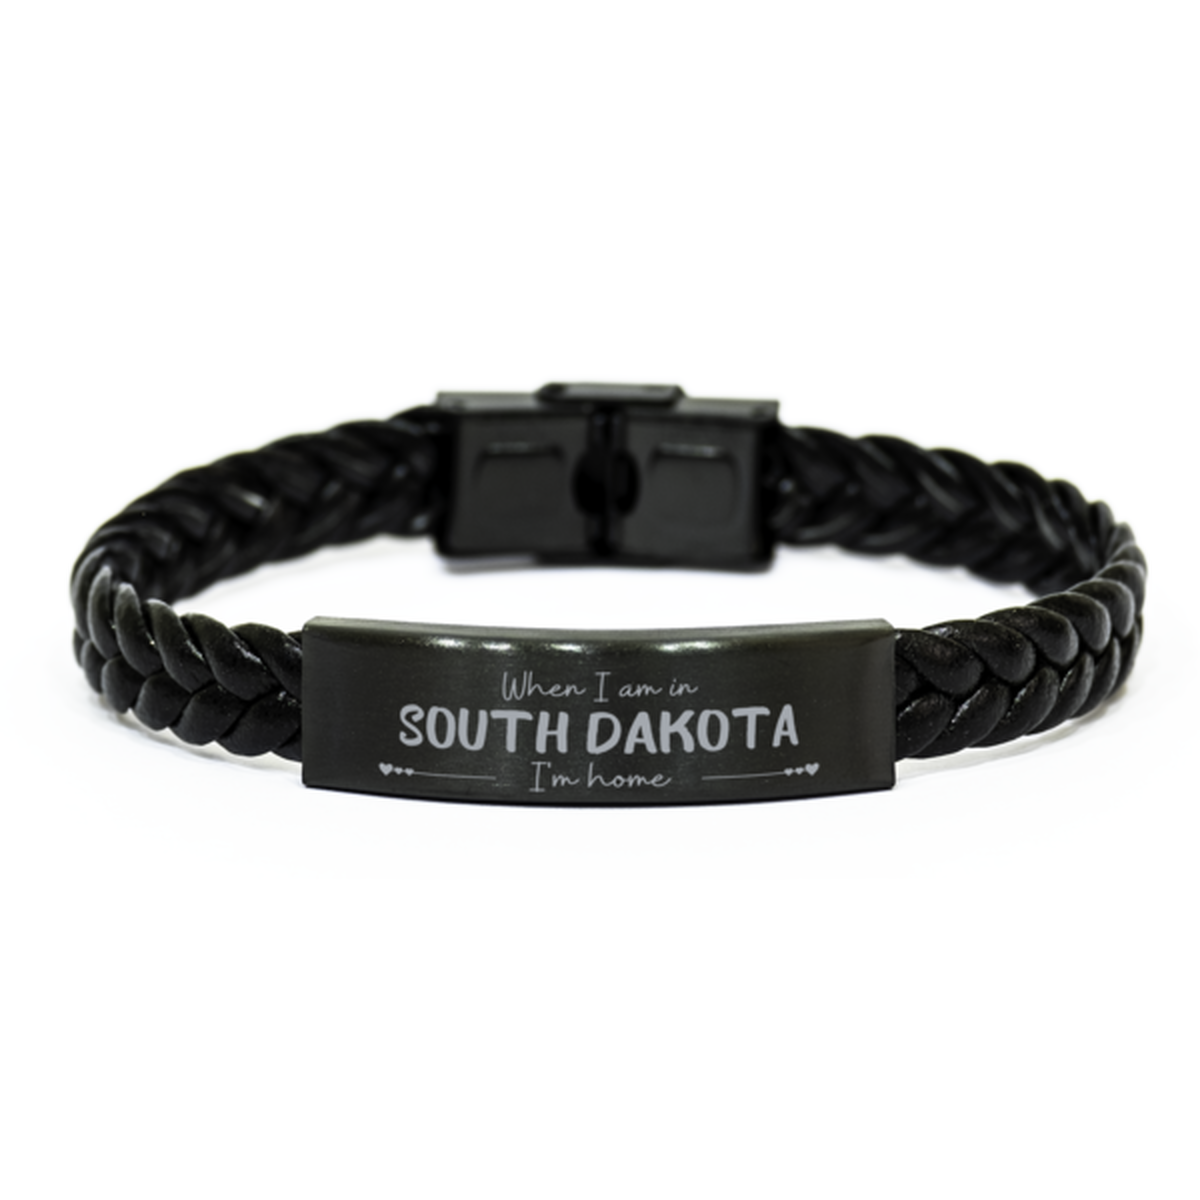 When I am in South Dakota I'm home Braided Leather Bracelet, Cheap Gifts For South Dakota, State South Dakota Birthday Gifts for Friends Coworker